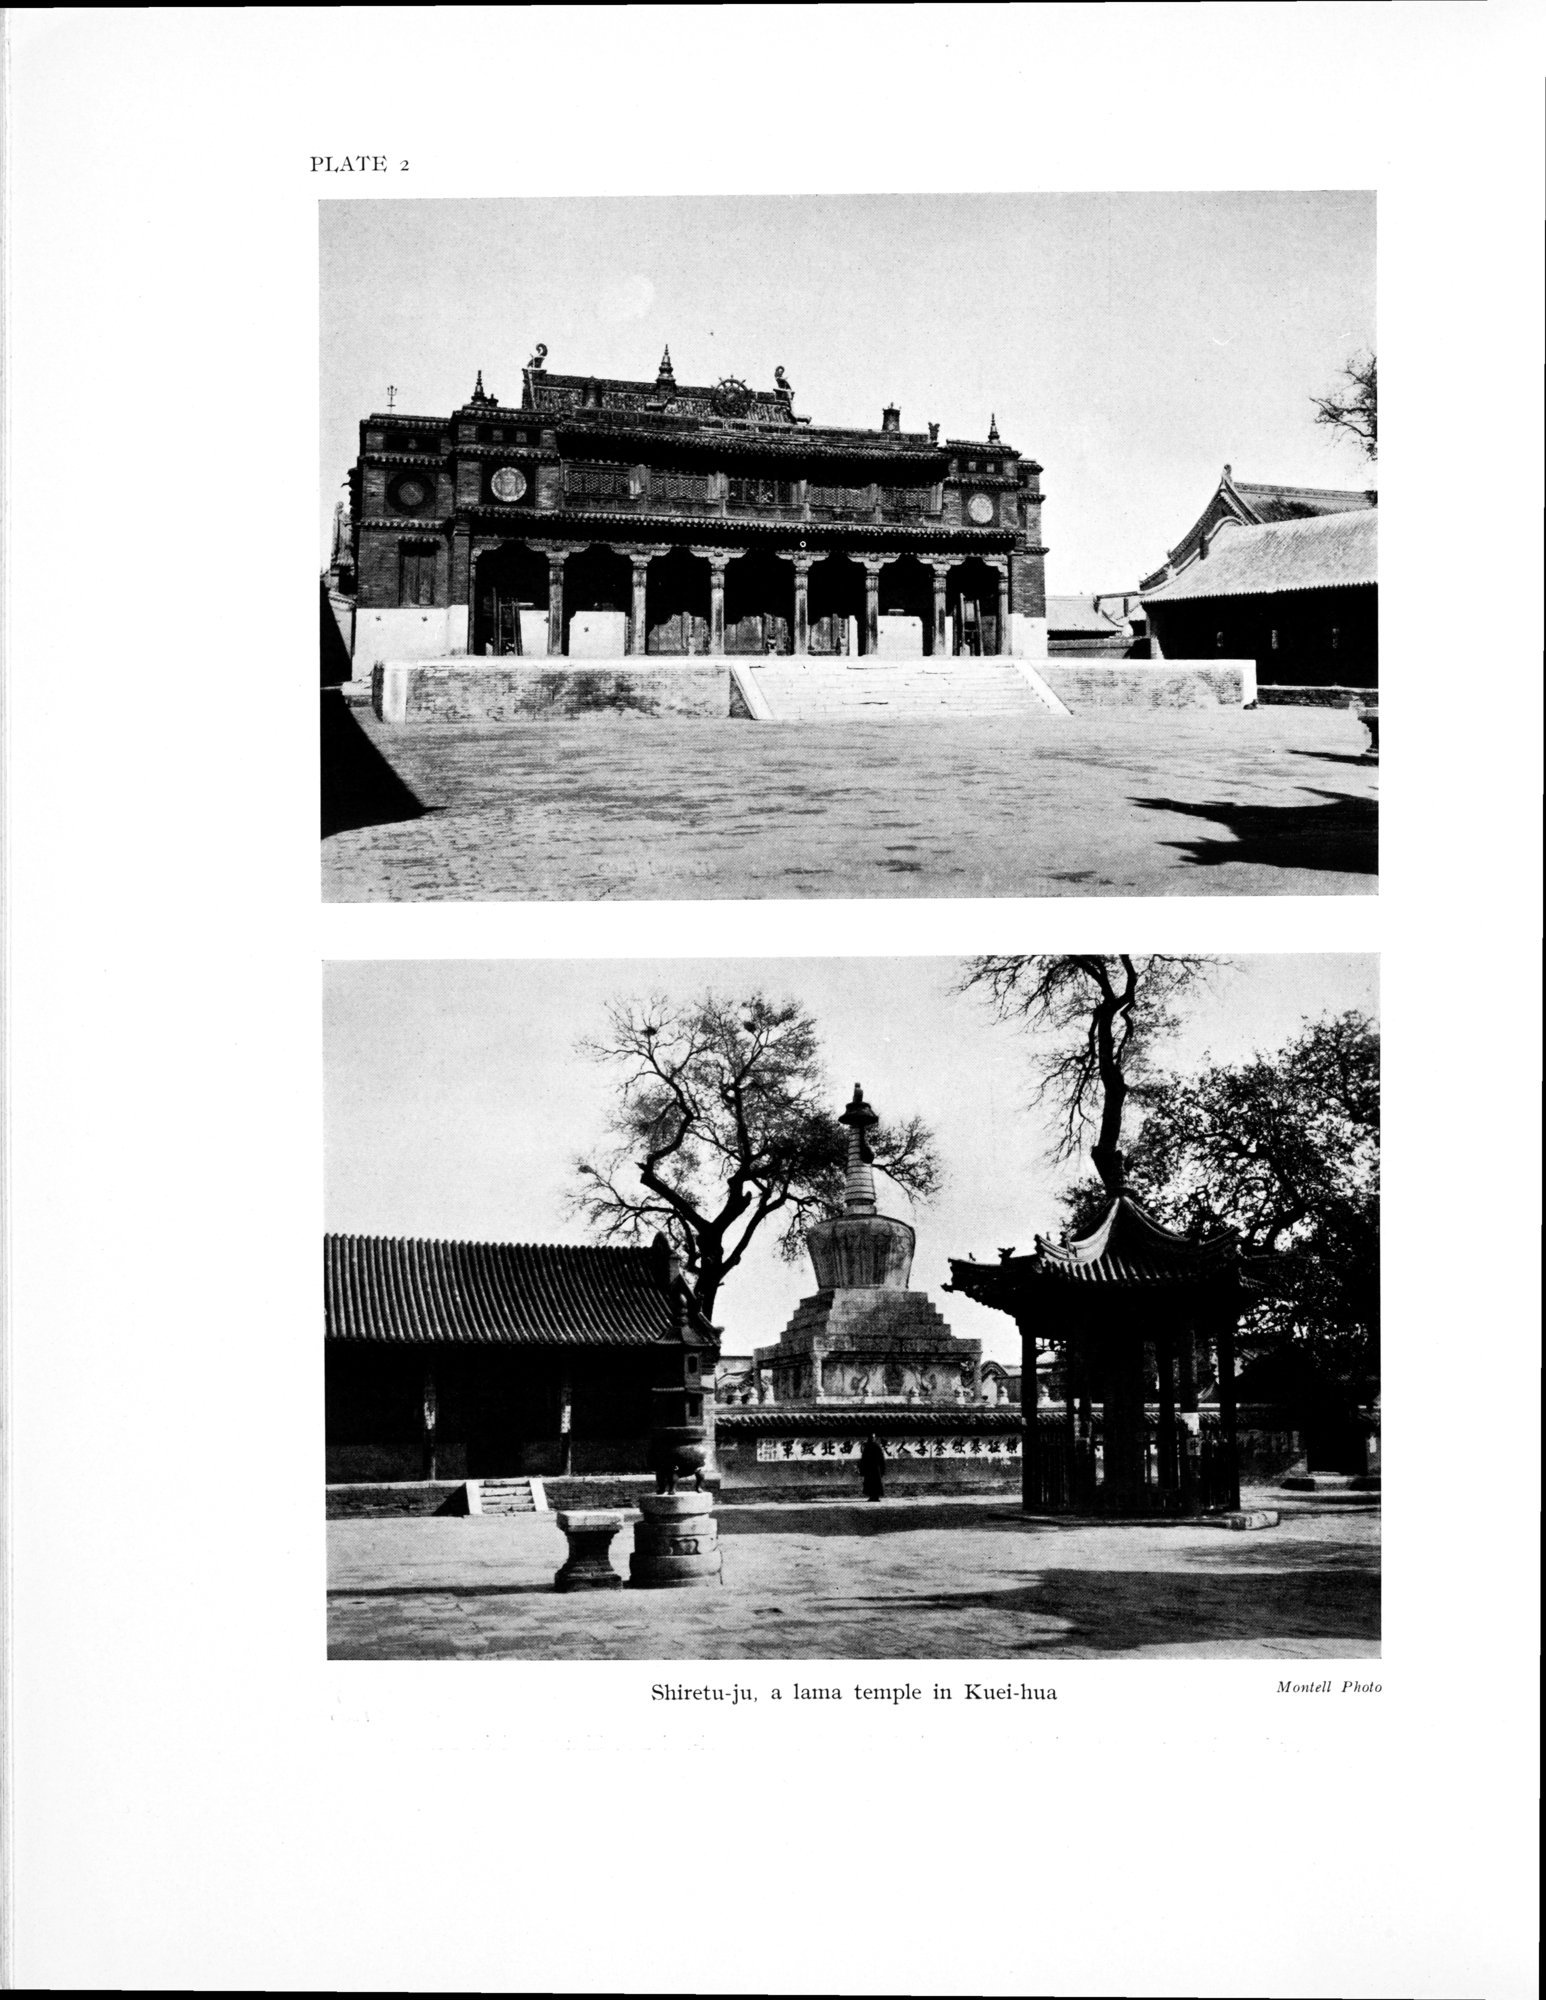 History of the expedition in Asia, 1927-1935 : vol.3 / 30 ページ（白黒高解像度画像）